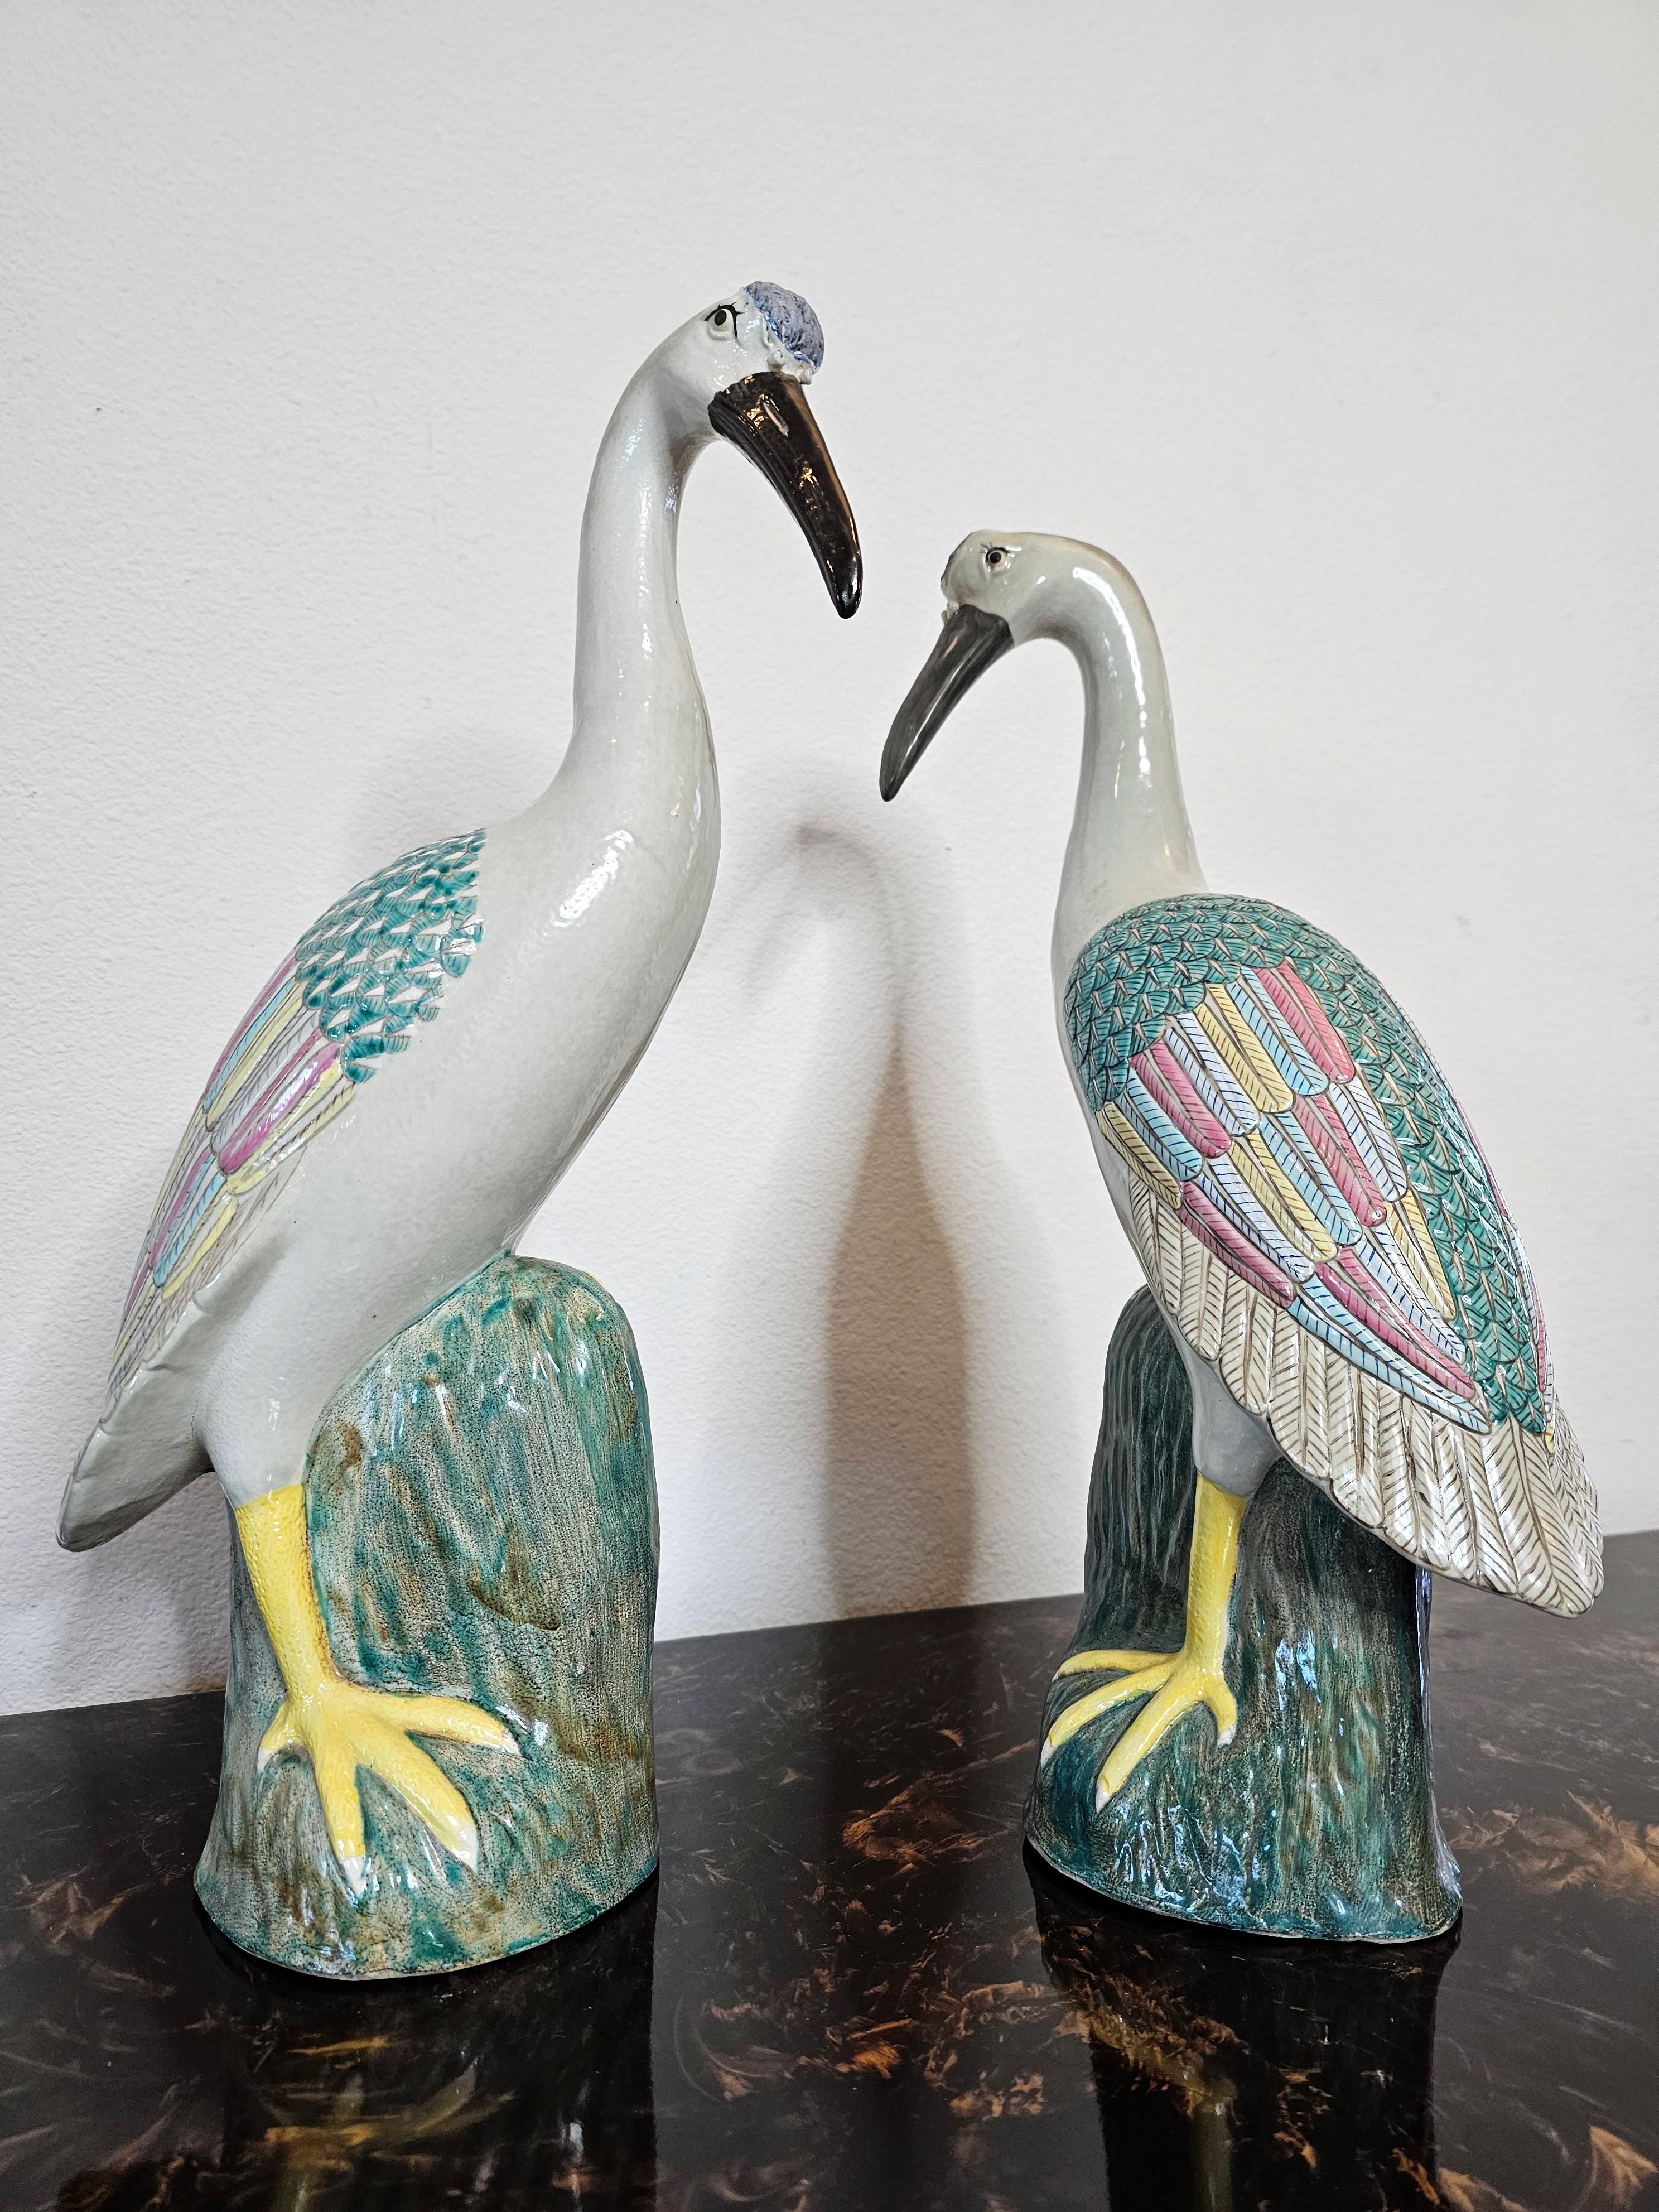 Two elegant late Qing Dynasty (1636-1912) Chinese Export glazed porcelain crane figures. Cranes of this large size for the export market are rare. 

Early 20th century, made in China for the European or American export market when exotic Asian /